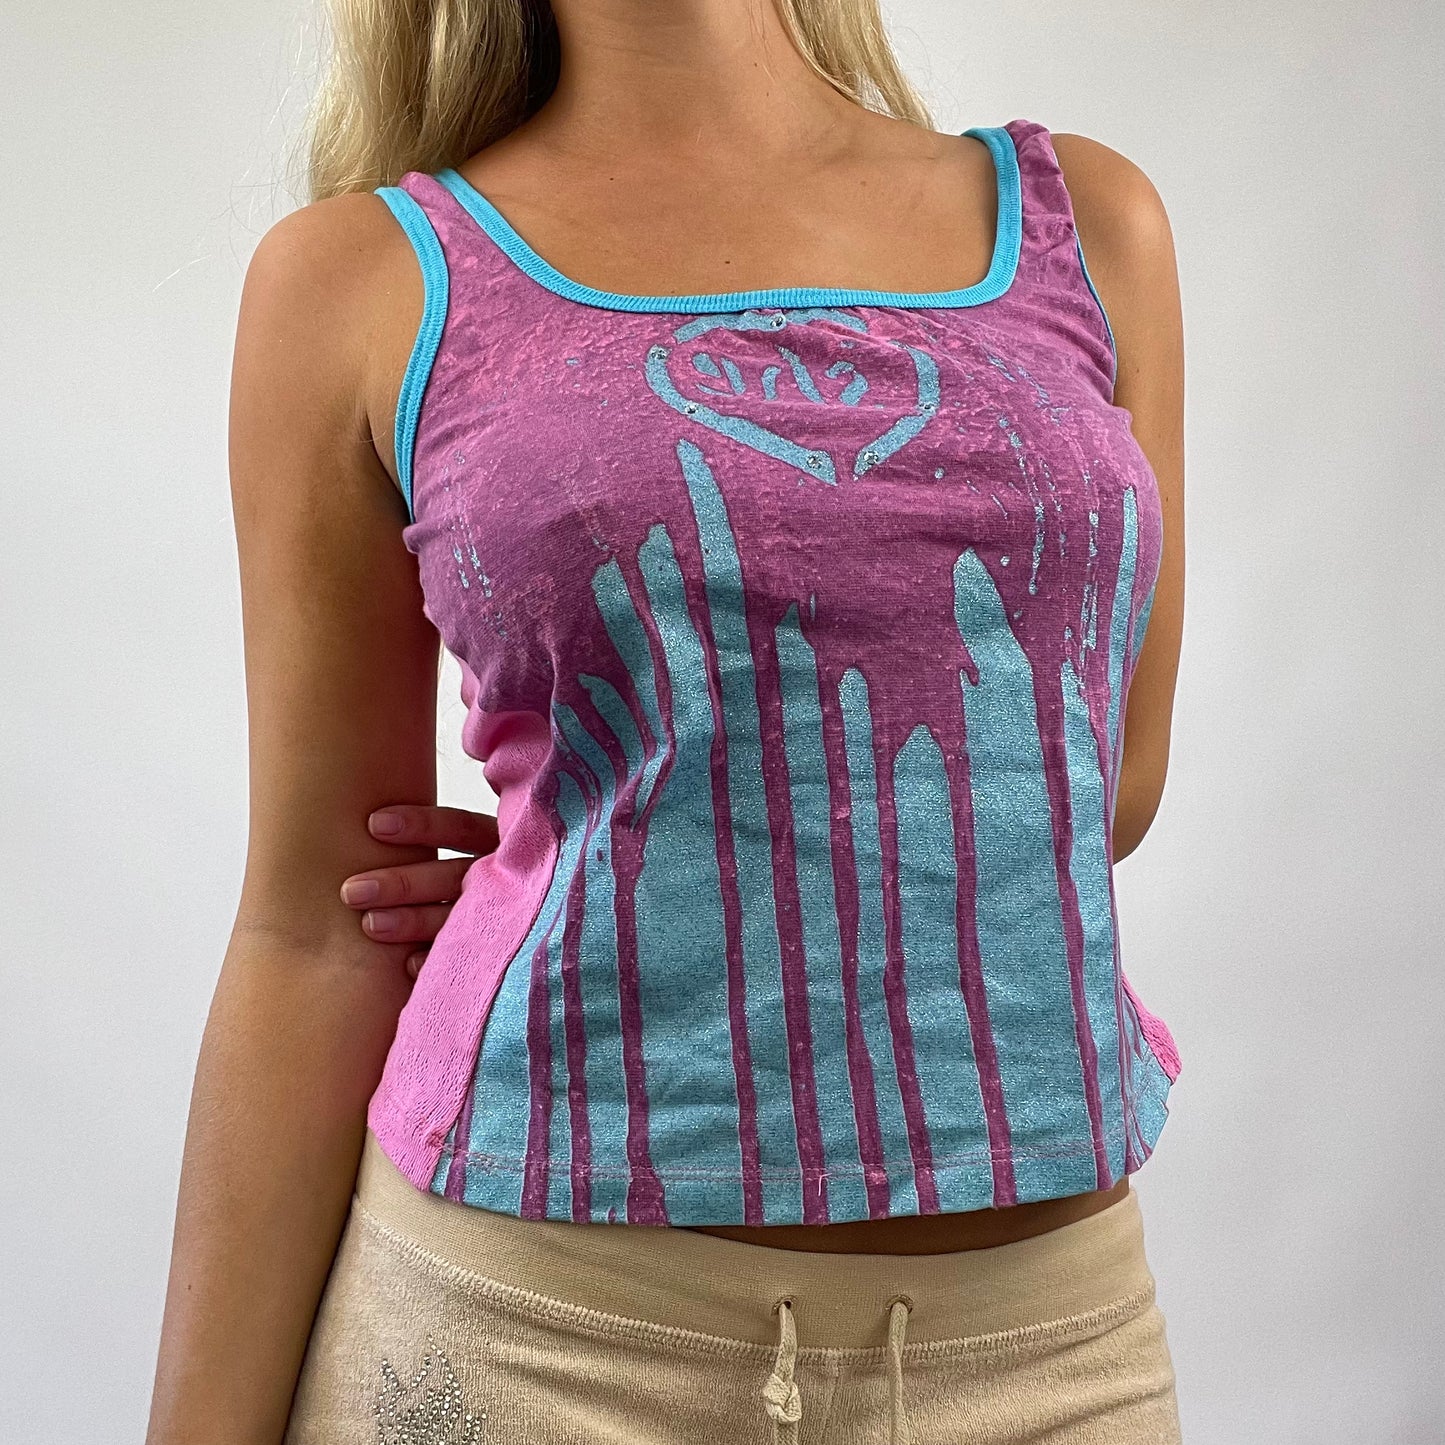 MISS REMASS DROP | small pink and blue graphic vest with diamanté detail